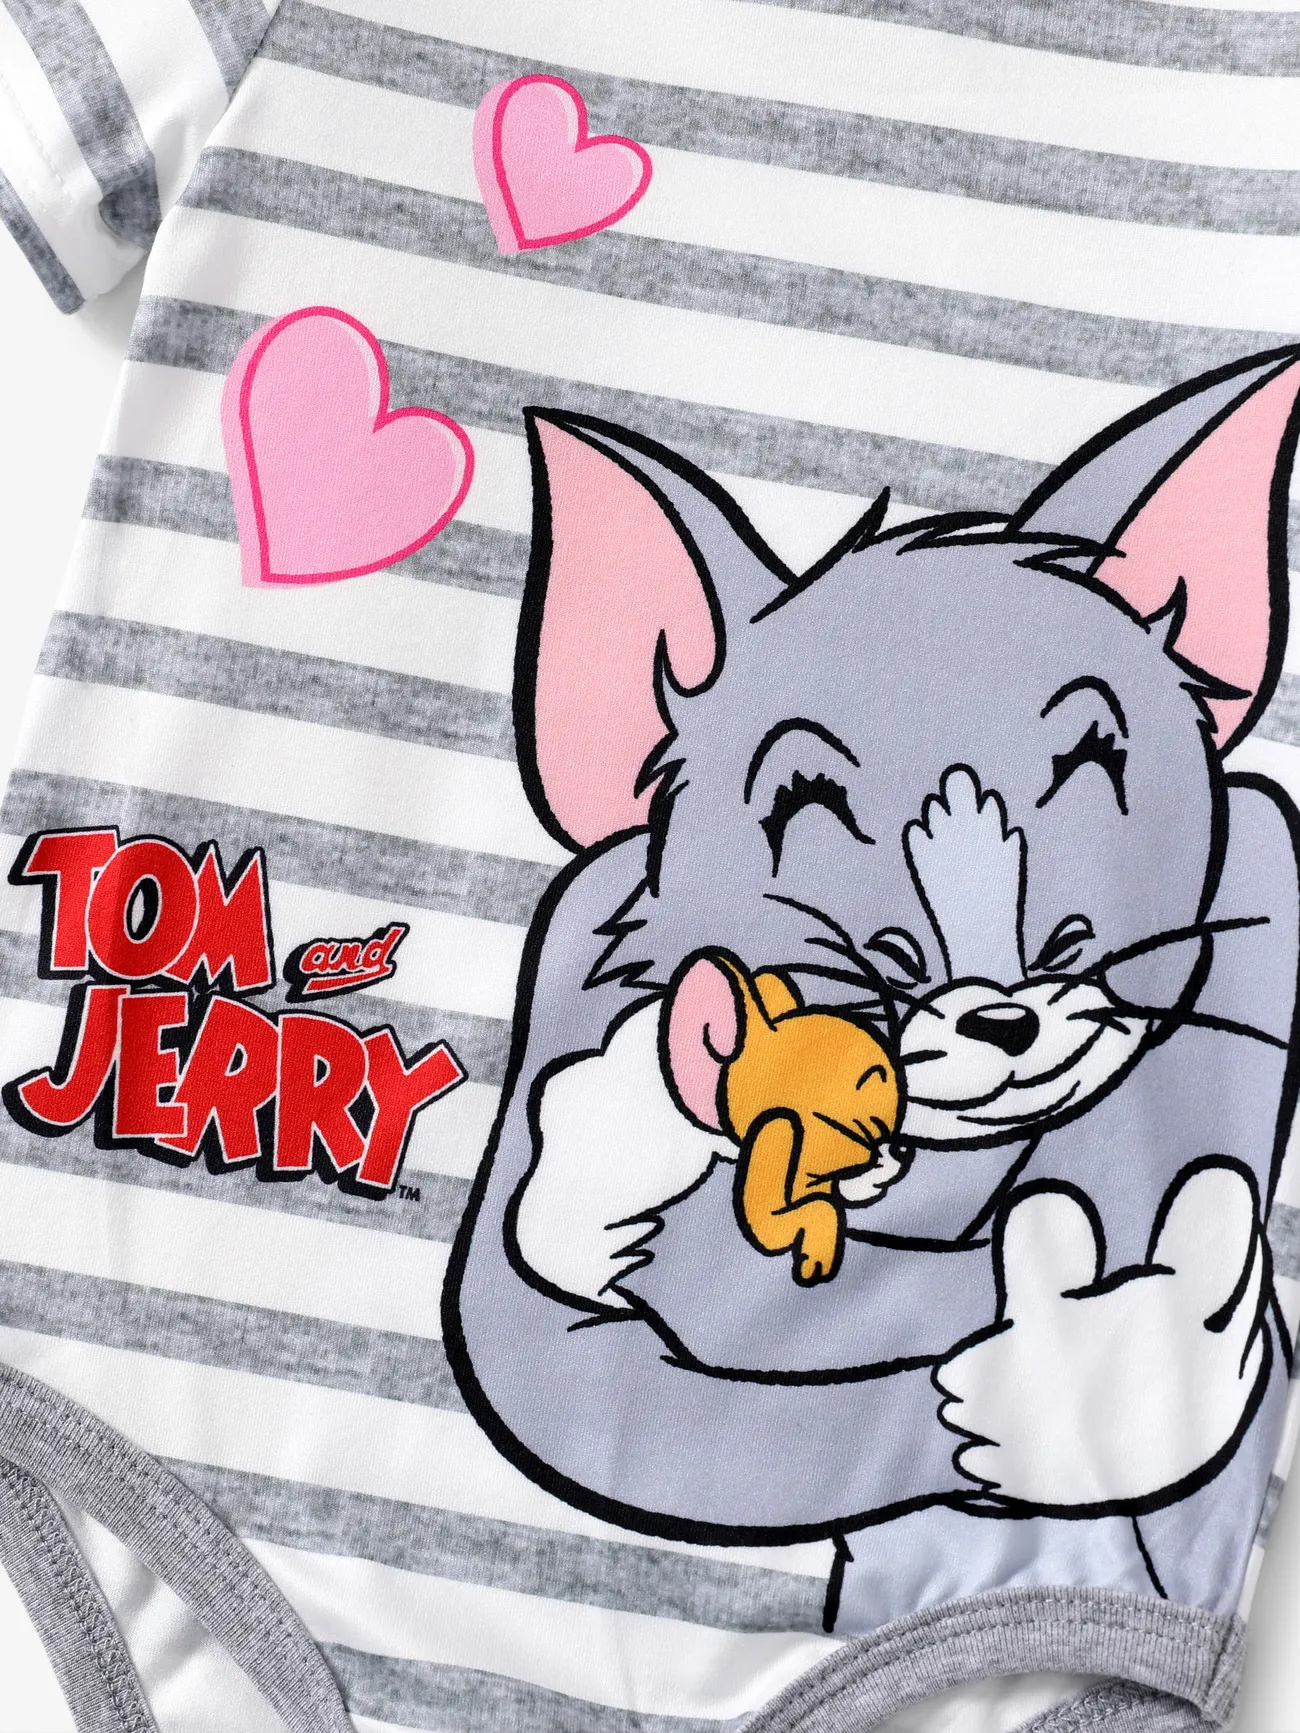 Tom and Jerry Baby Girls/Boys 1pc Heart Lovely Character Striped Print Onesie
 MiddleAsh big image 1